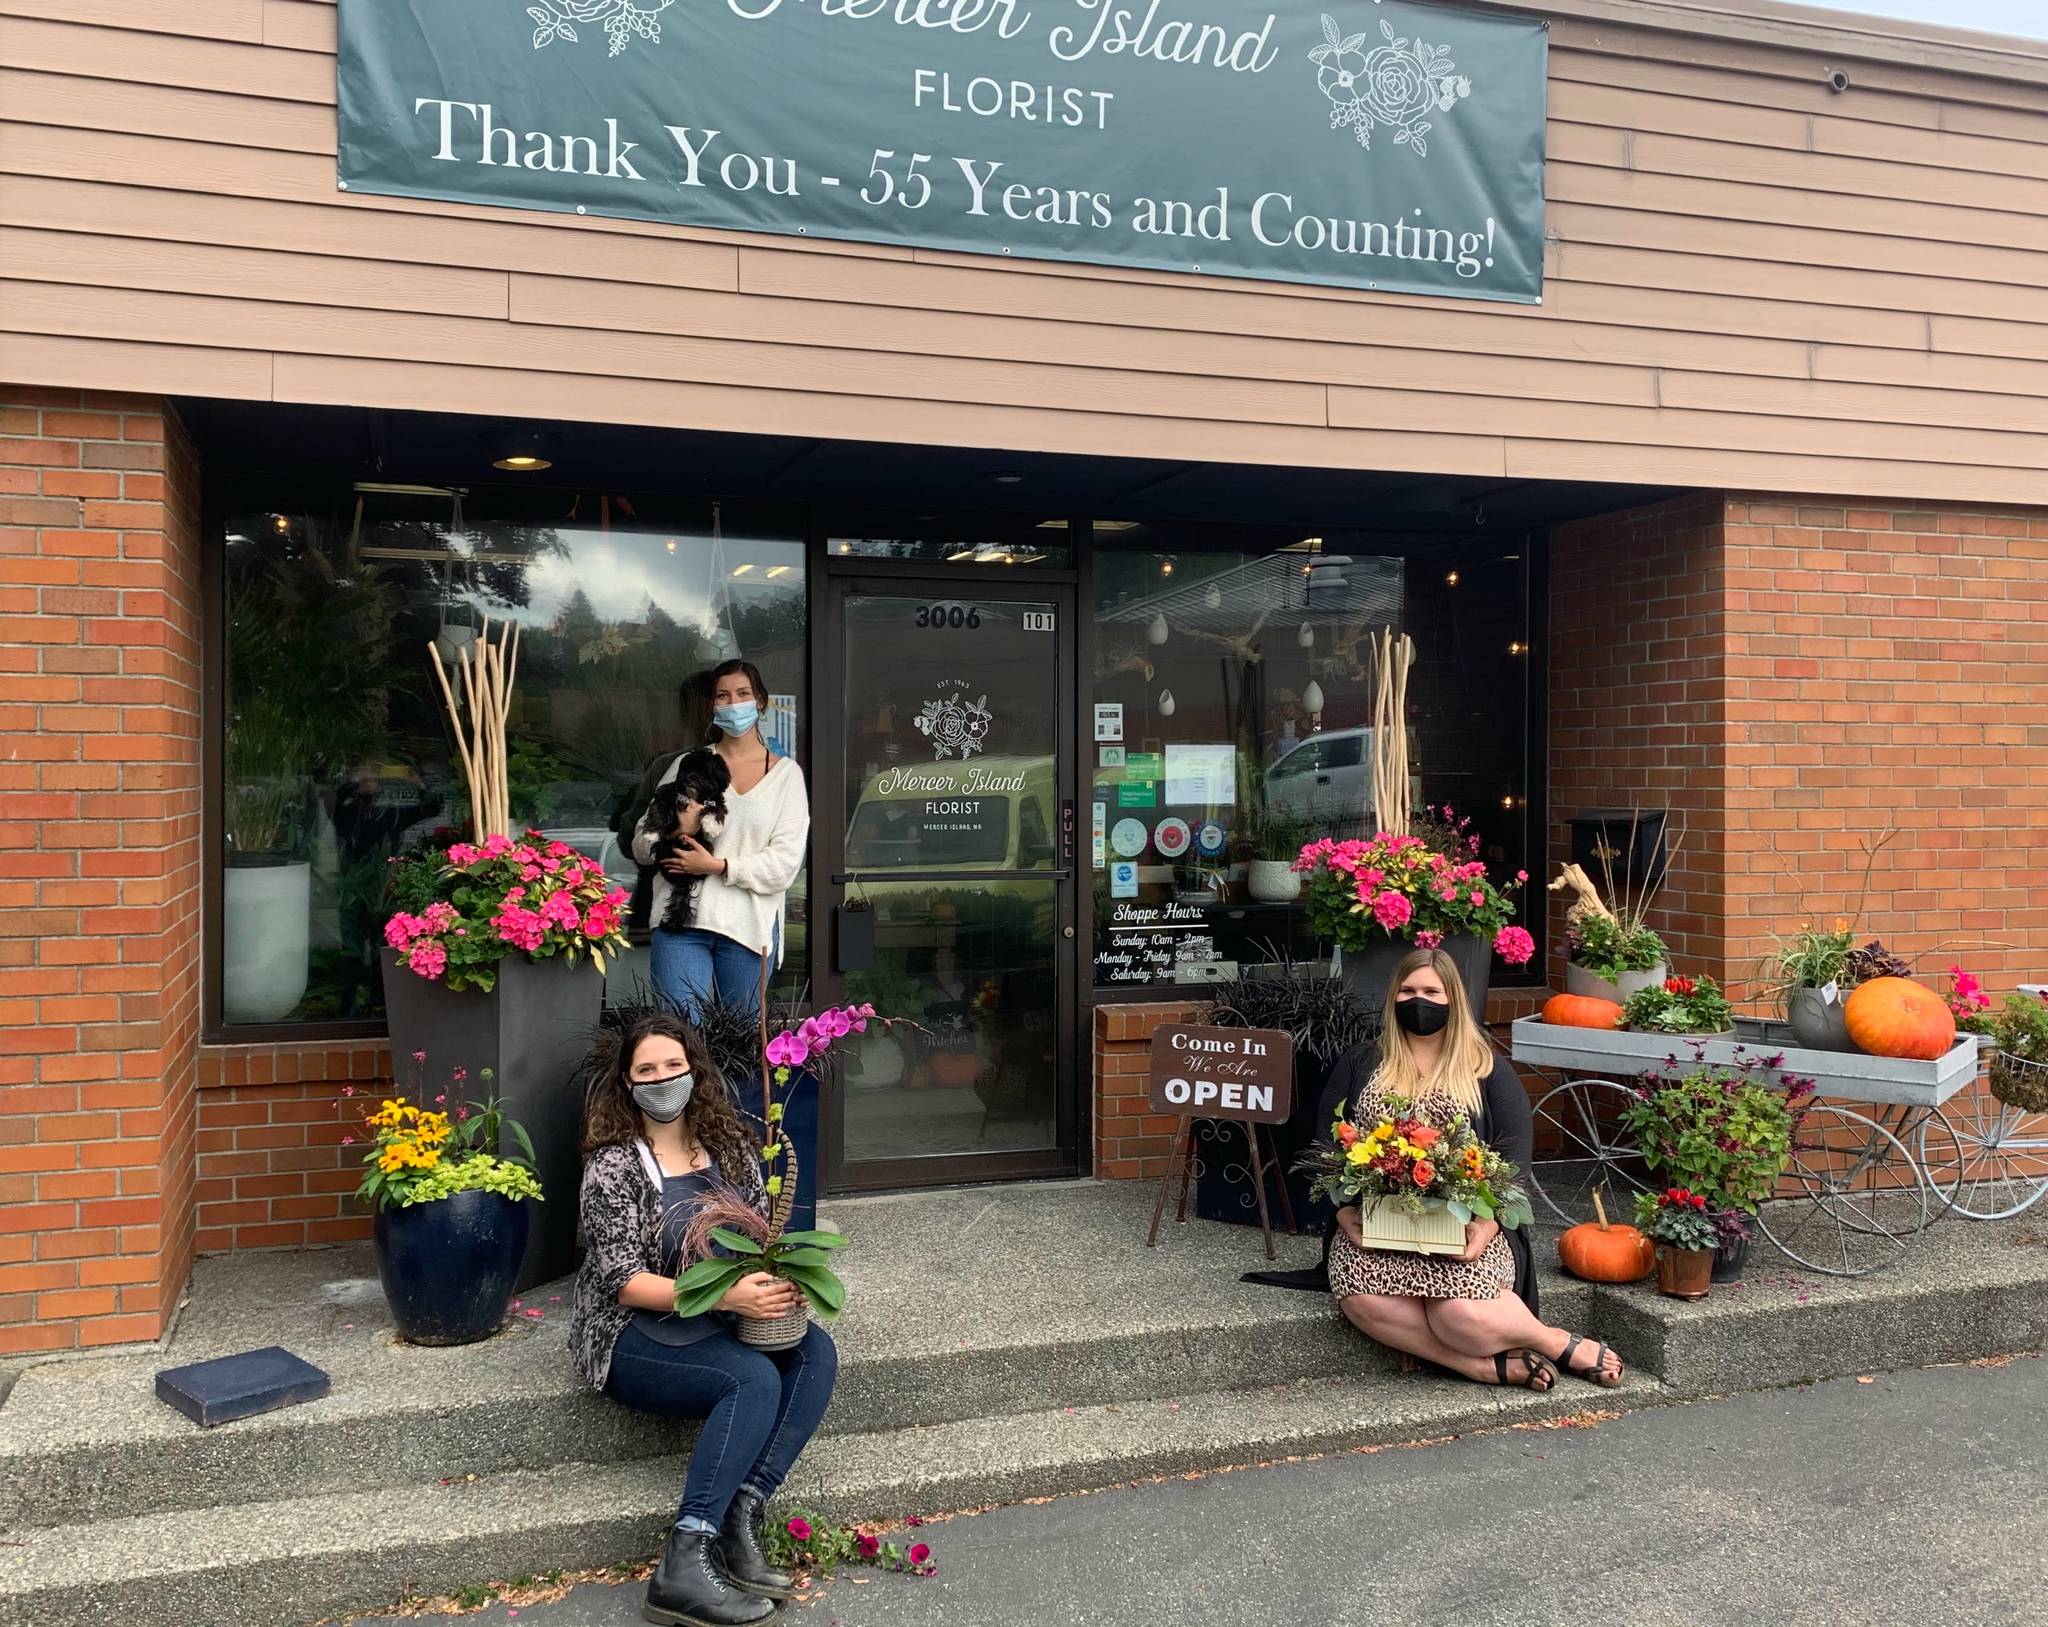 From left to right at Mercer Island Florist, Christina Montilla, business operations and marketing director; Ava Baumgarten, senior shop associate; and Jenna Weischedel, lead designer and shop manager. Black-and-white Havanese Louie is the shop dog. Courtesy photo